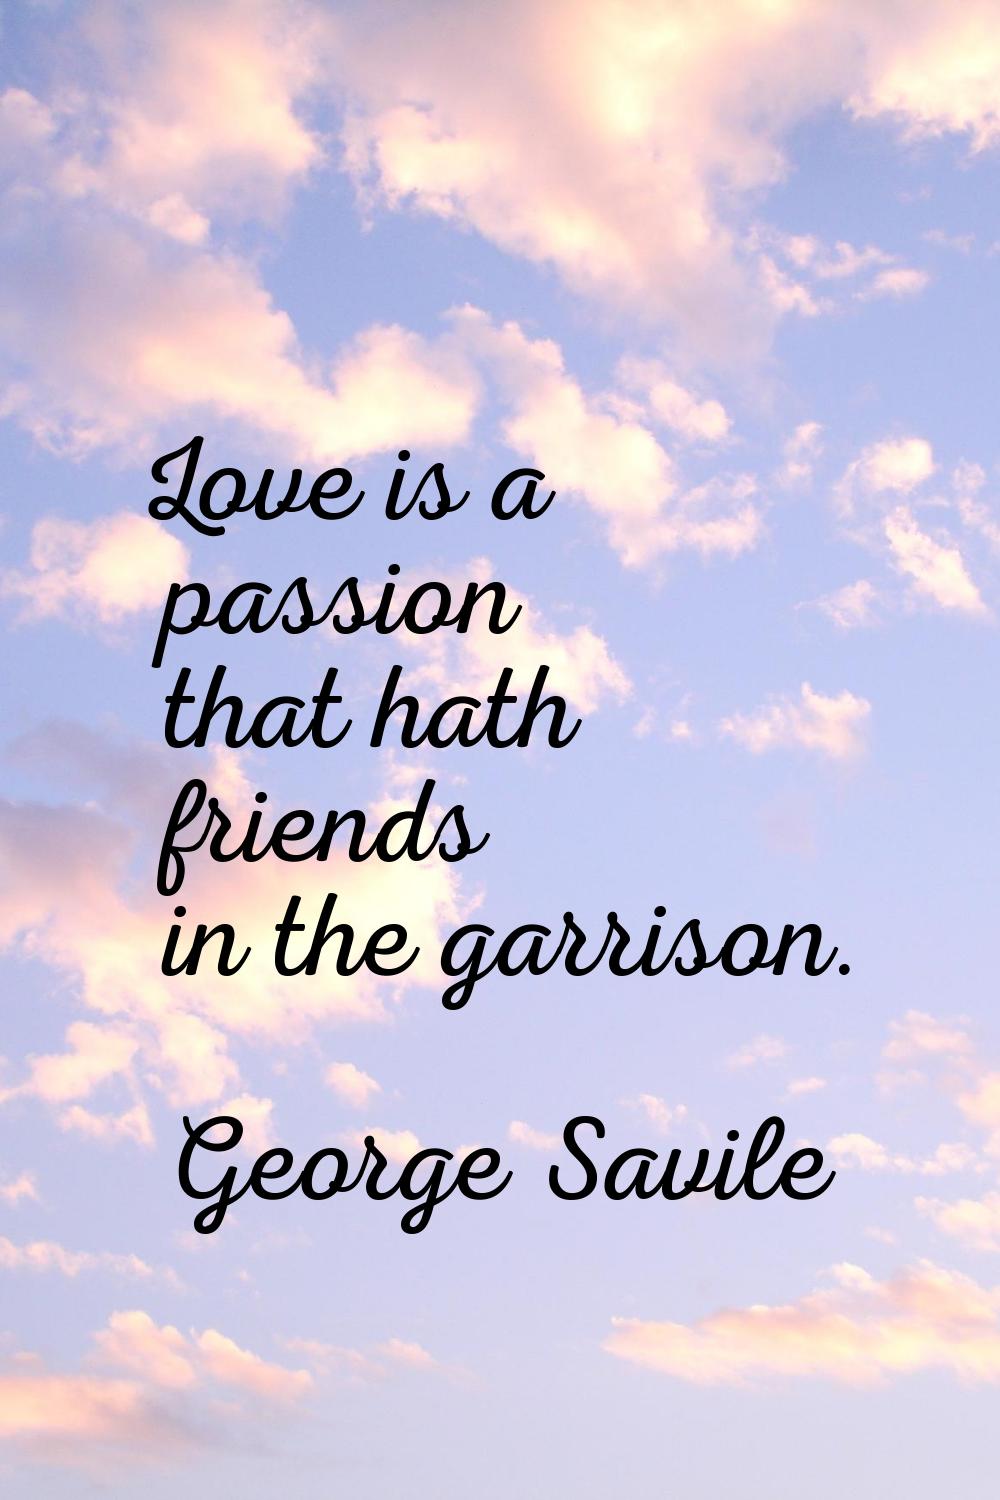 Love is a passion that hath friends in the garrison.